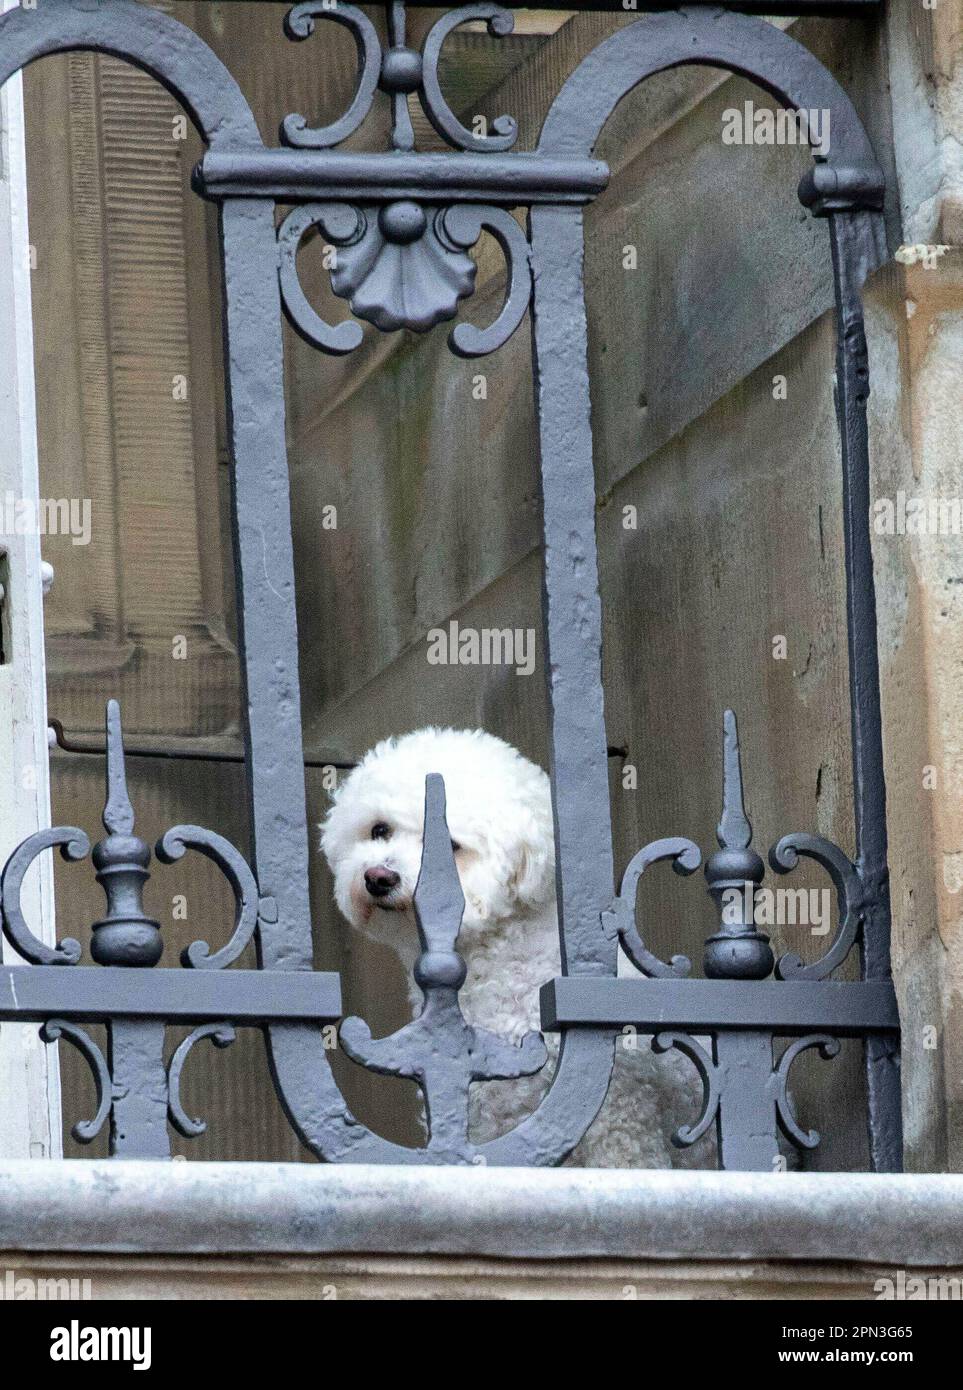 dog Cerise, a Bichon Frise, at the balcony of Christian IX Palace at Amalienborg in Copenhagen, on April 16, 2023, on the occasion of Queen Margrethe 83th birthday Photo: Albert Nieboer/Netherlands OUT/Point de Vue OUT Stock Photo